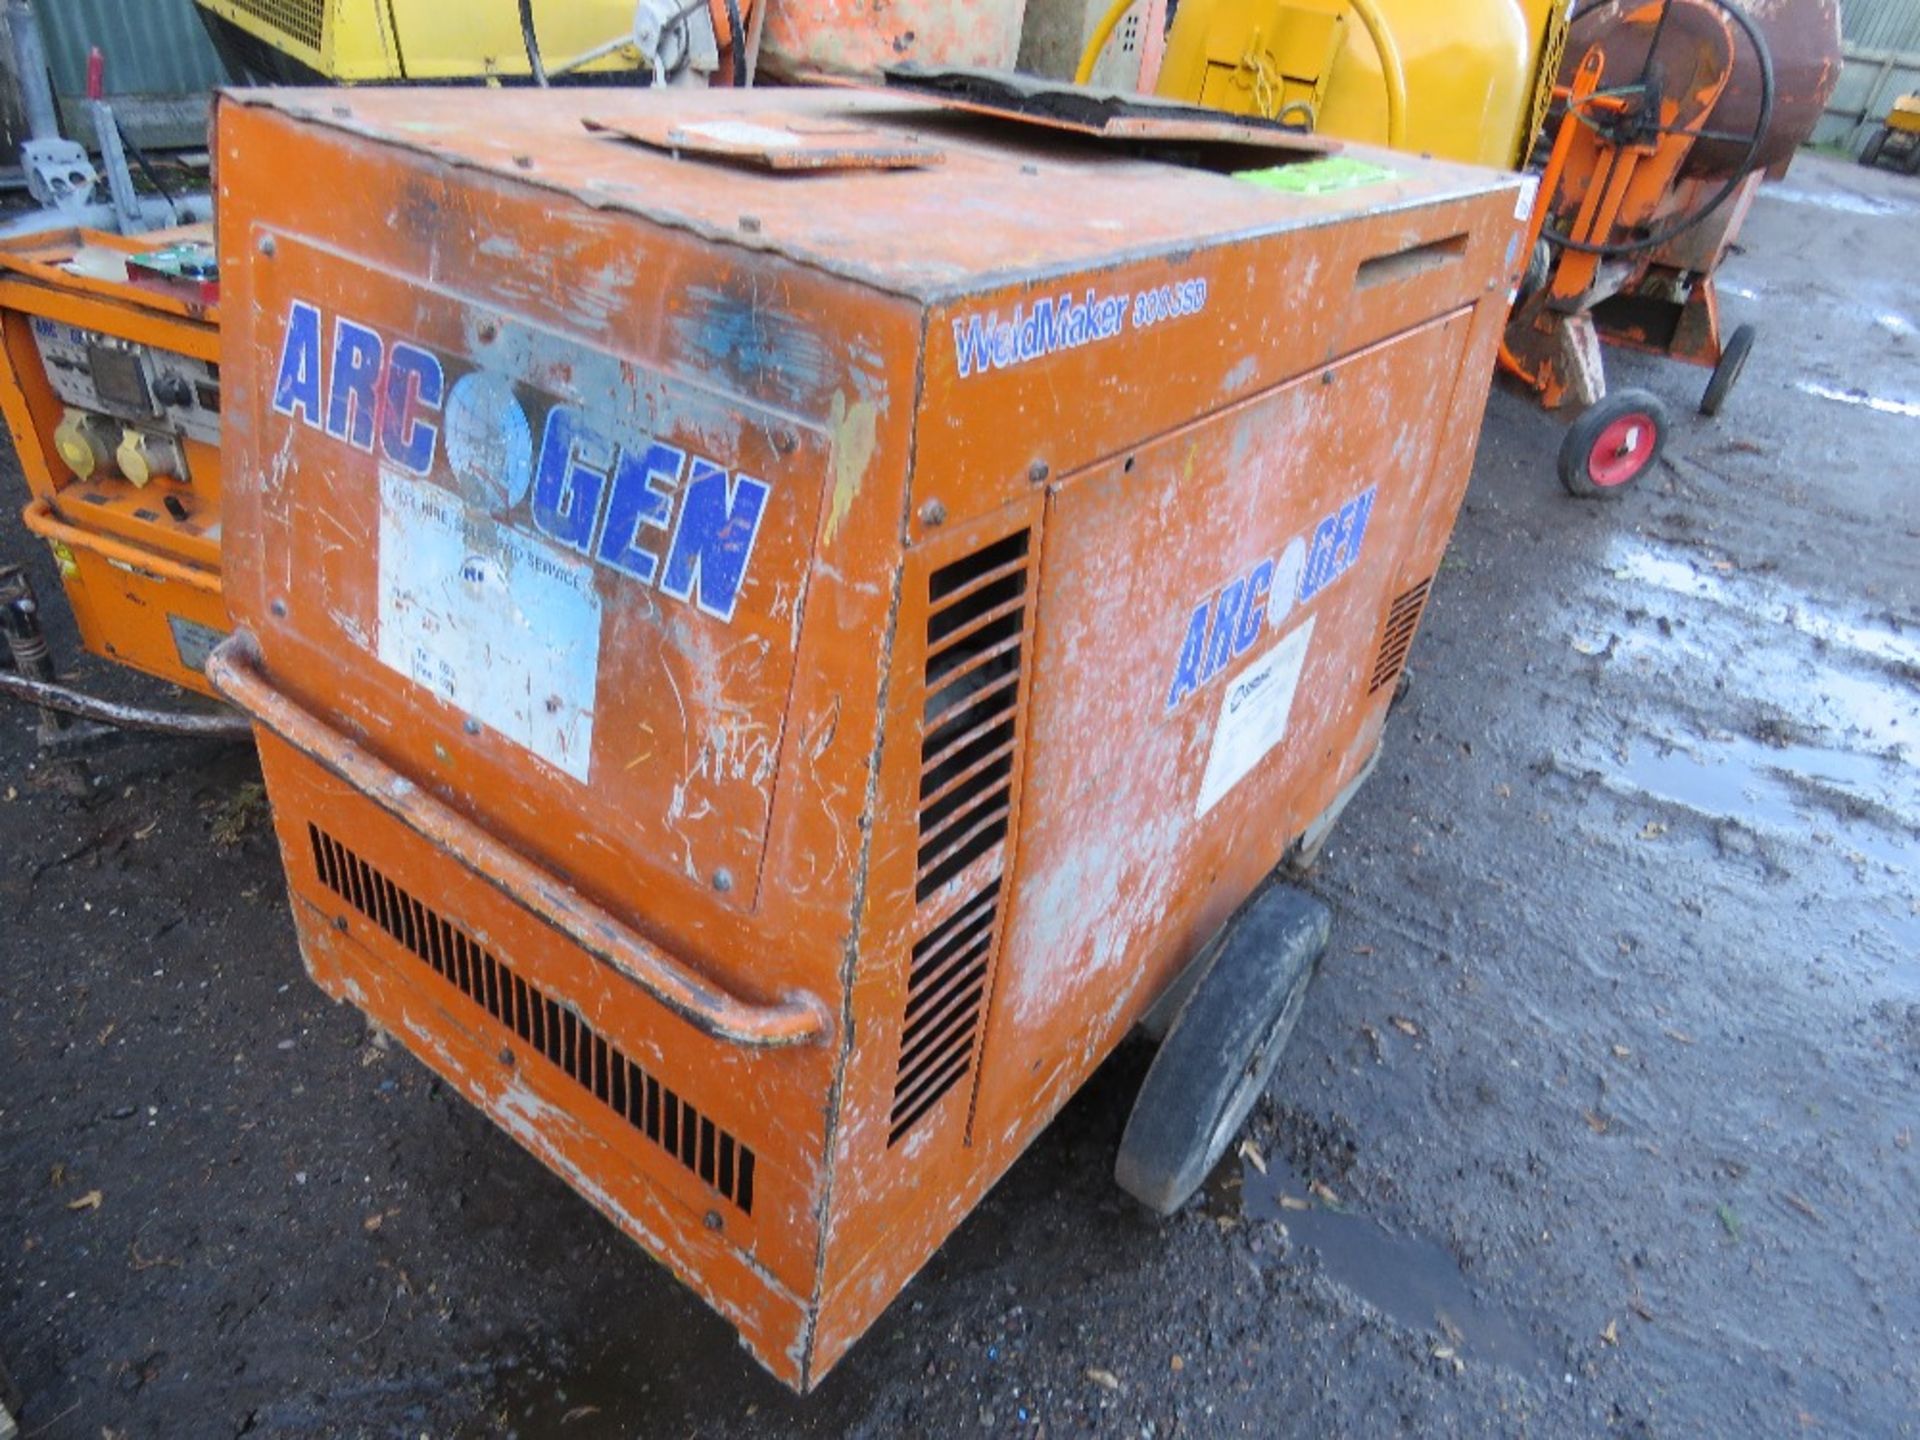 ARCGEN WELDMAKER 300 SSD WELDER GENERATOR. WHEN TESTED WAS SEEN TO RUN AND SHOWED OUTPUT ON 110V, WE - Image 4 of 7